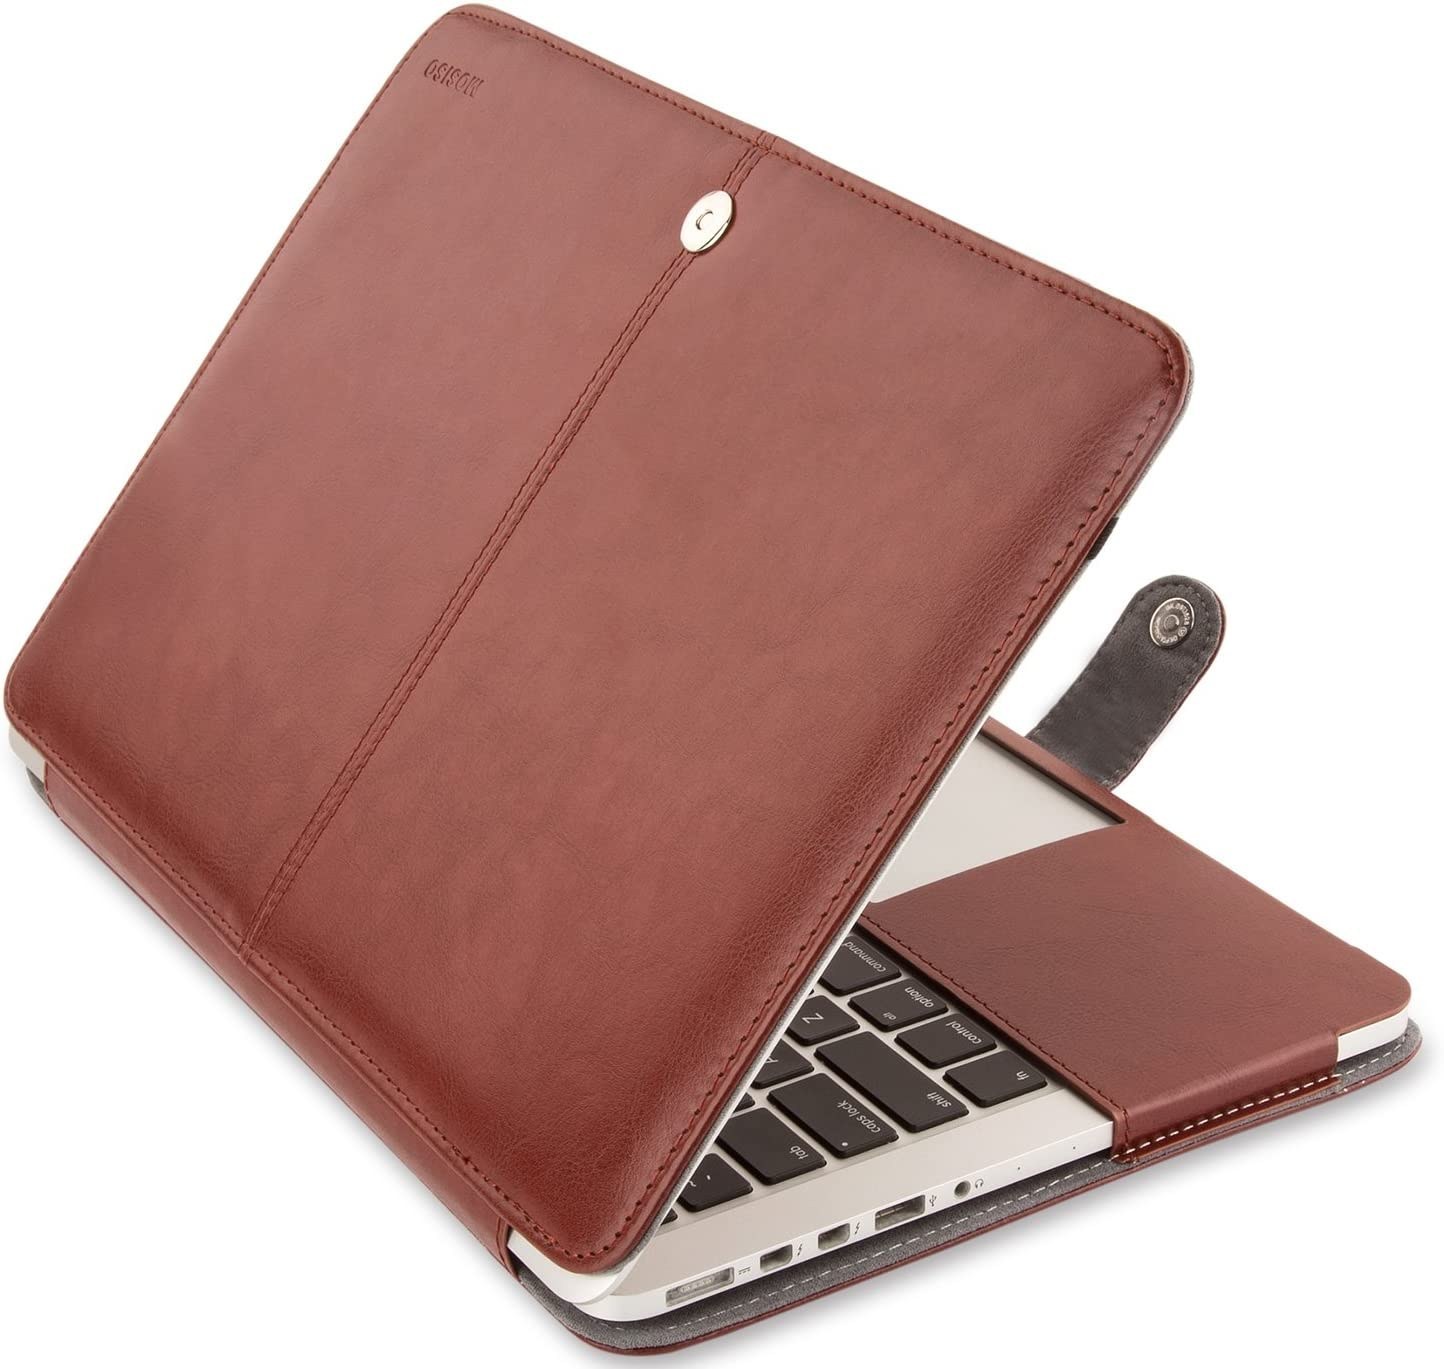 MacBook 16 & 15 inch Leather Carrying Case - SANDMARC Brown